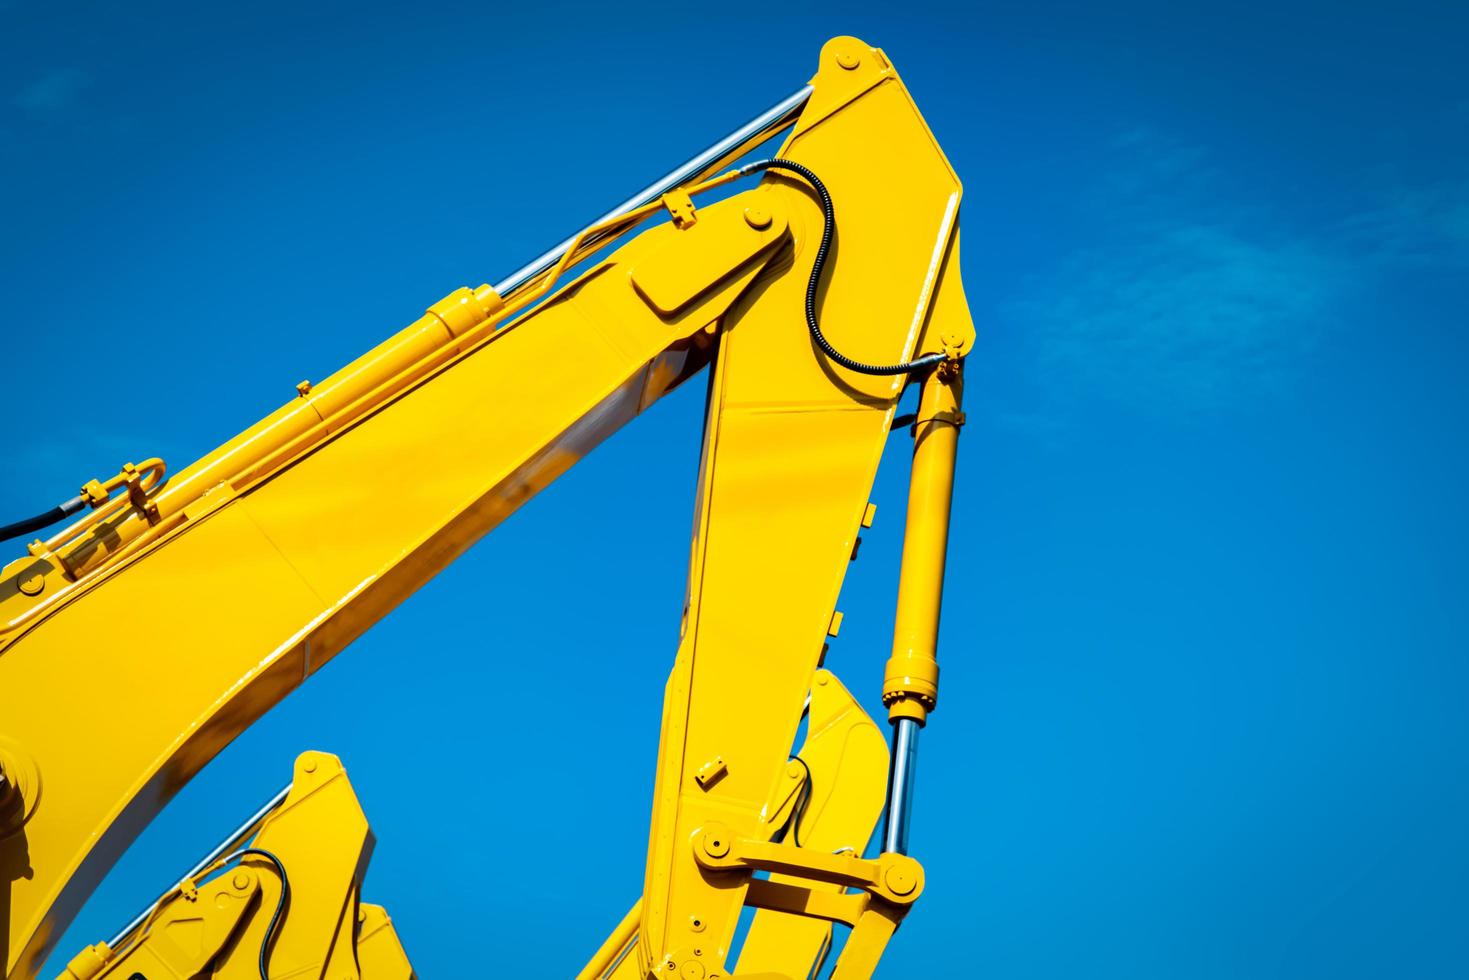 Yellow backhoe with hydraulic piston arm against clear blue sky. Heavy machine for excavation in construction site. Hydraulic machinery. Huge bulldozer. Heavy industry photo